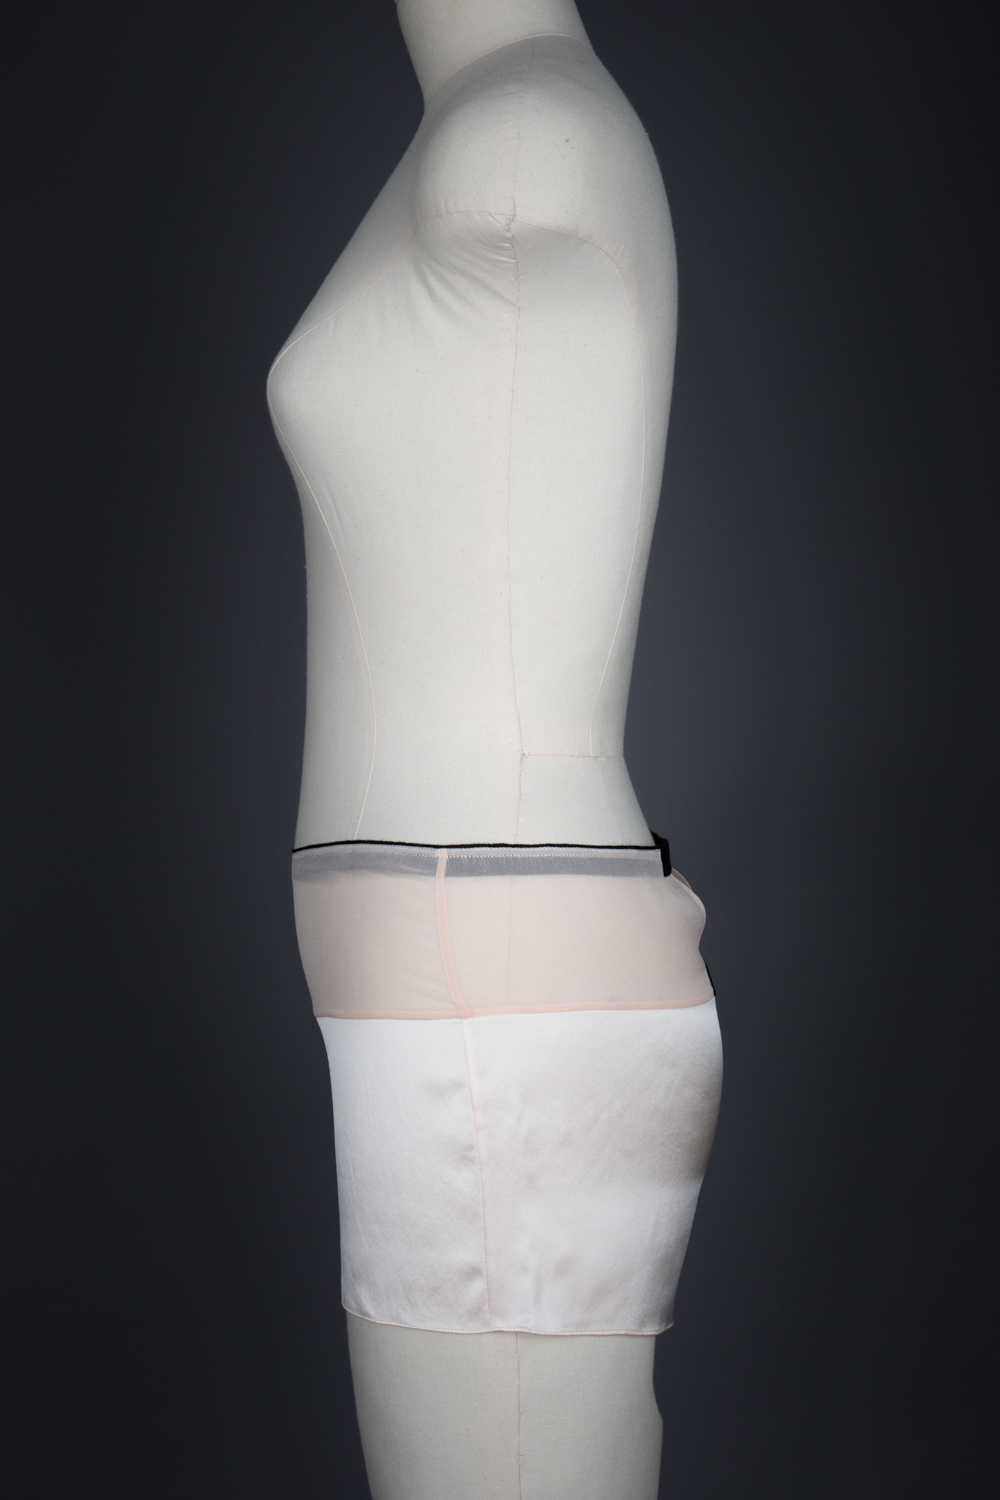 Silk Open Back Shorts By Jean Yu, c. 2010, USA. The Underpinnings Museum. Photography by Tigz Rice.